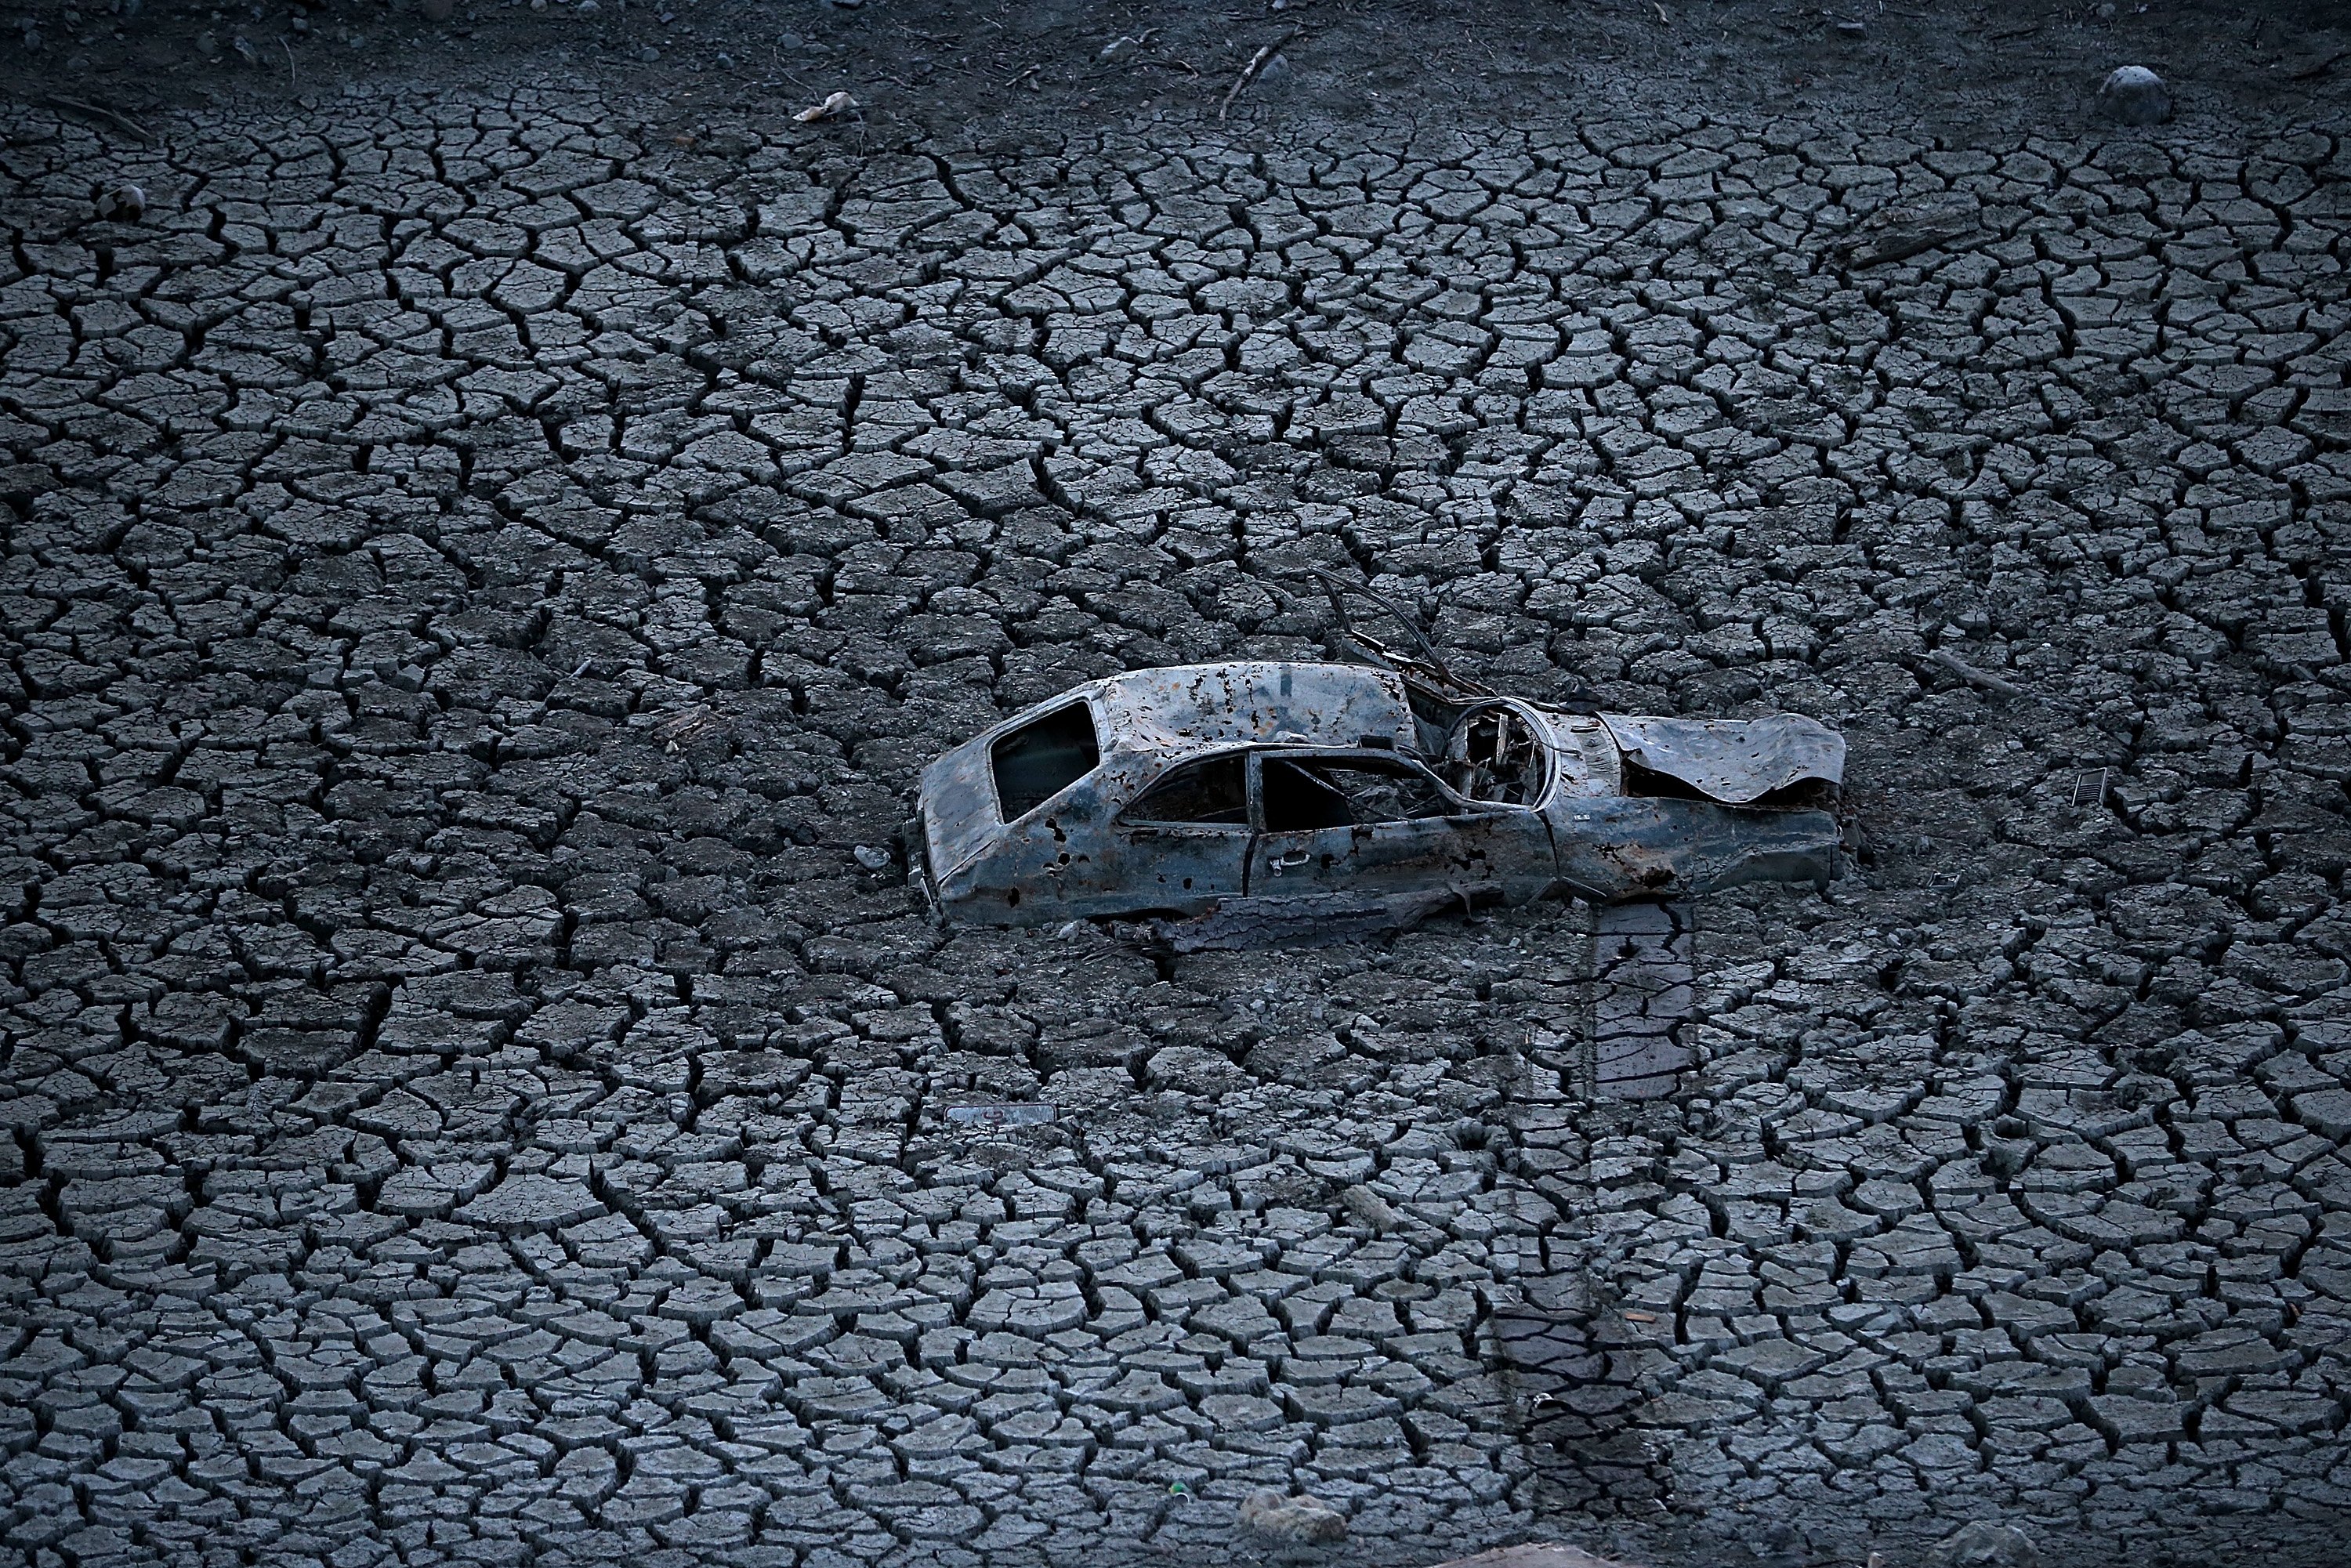 A car sits in dried and cracked earth of what was the bottom of the Almaden Reservoir on Jan. 28, 2014 in San Jose, Calif. (Justin Sullivan / Getty Images)